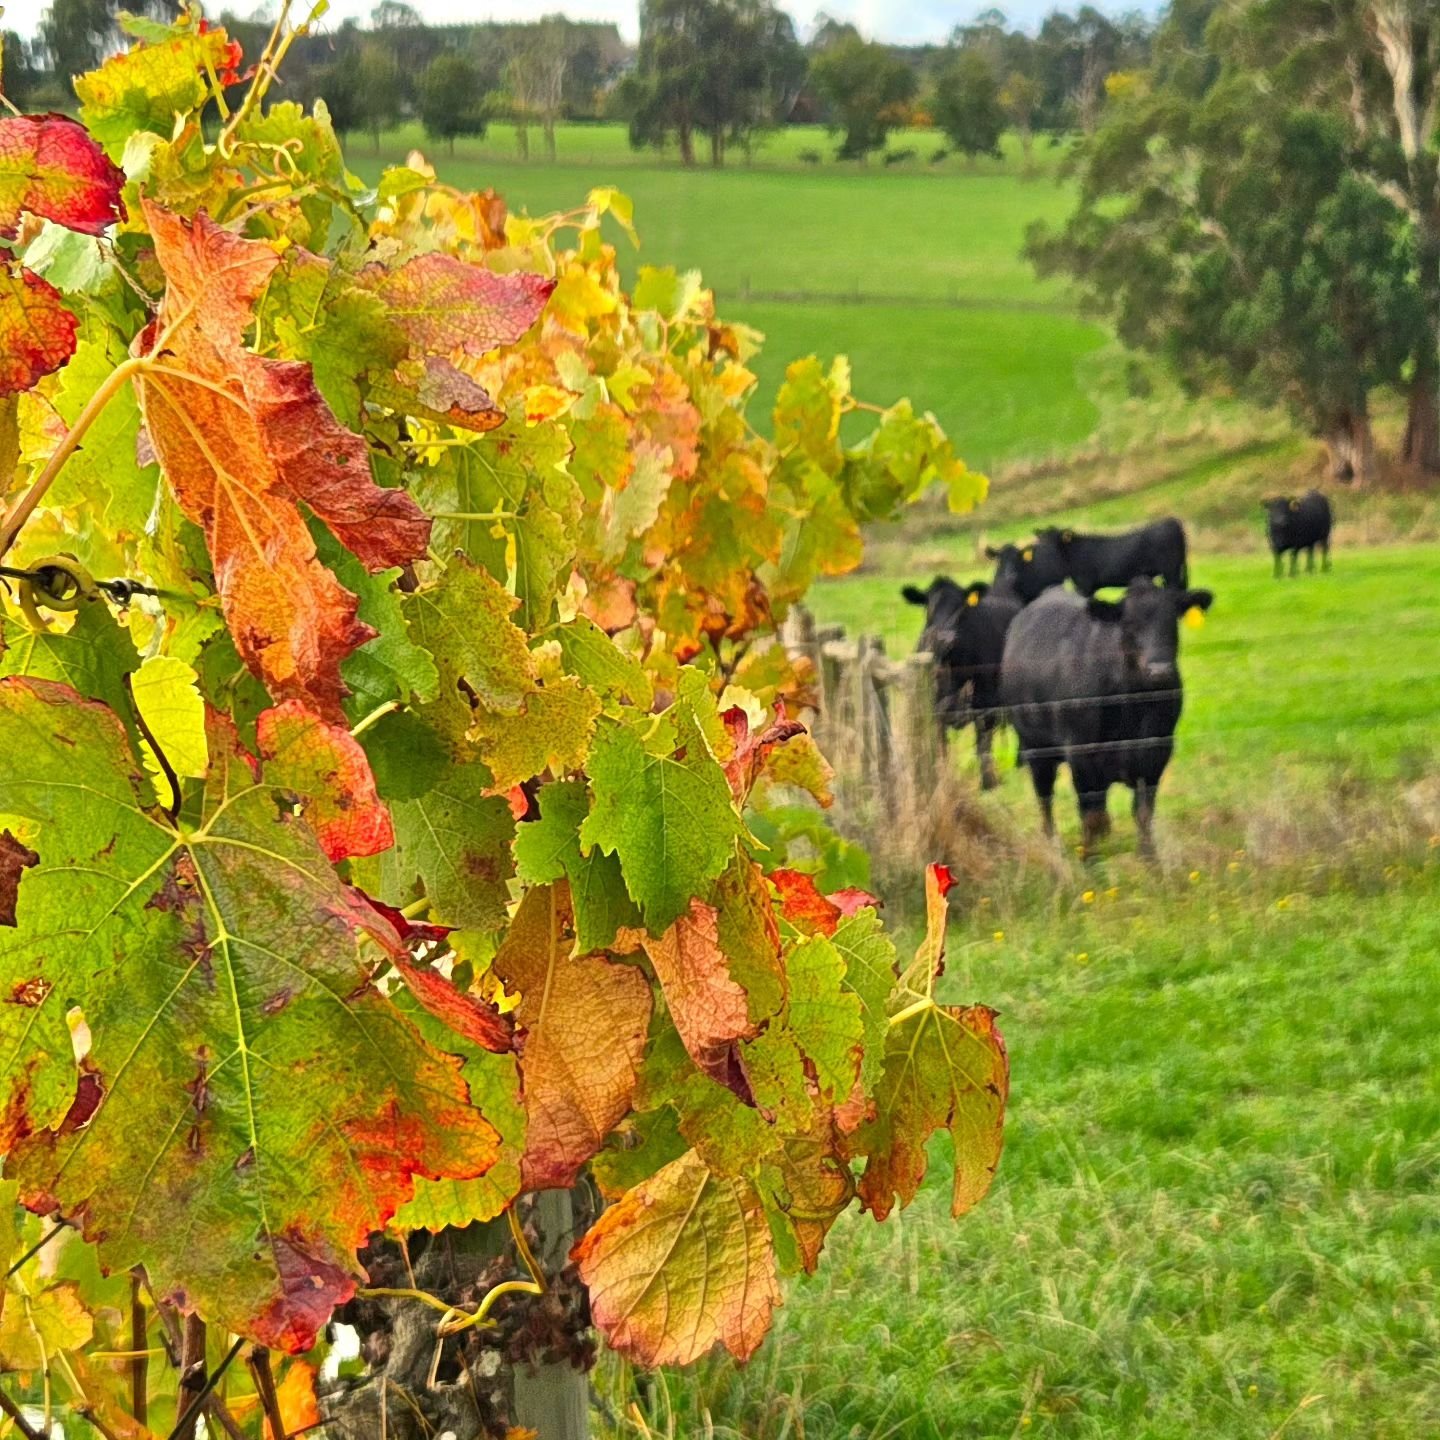 Back tomorrow from 12pm! Come and experience Autumn in the vineyard 🍂

www.hogget.com.au | 5623 2211

#autumn #dine #dining #vineyard #wineryrestaurant #gippsland #farmtotable #paddocktoplate #local #seasonal